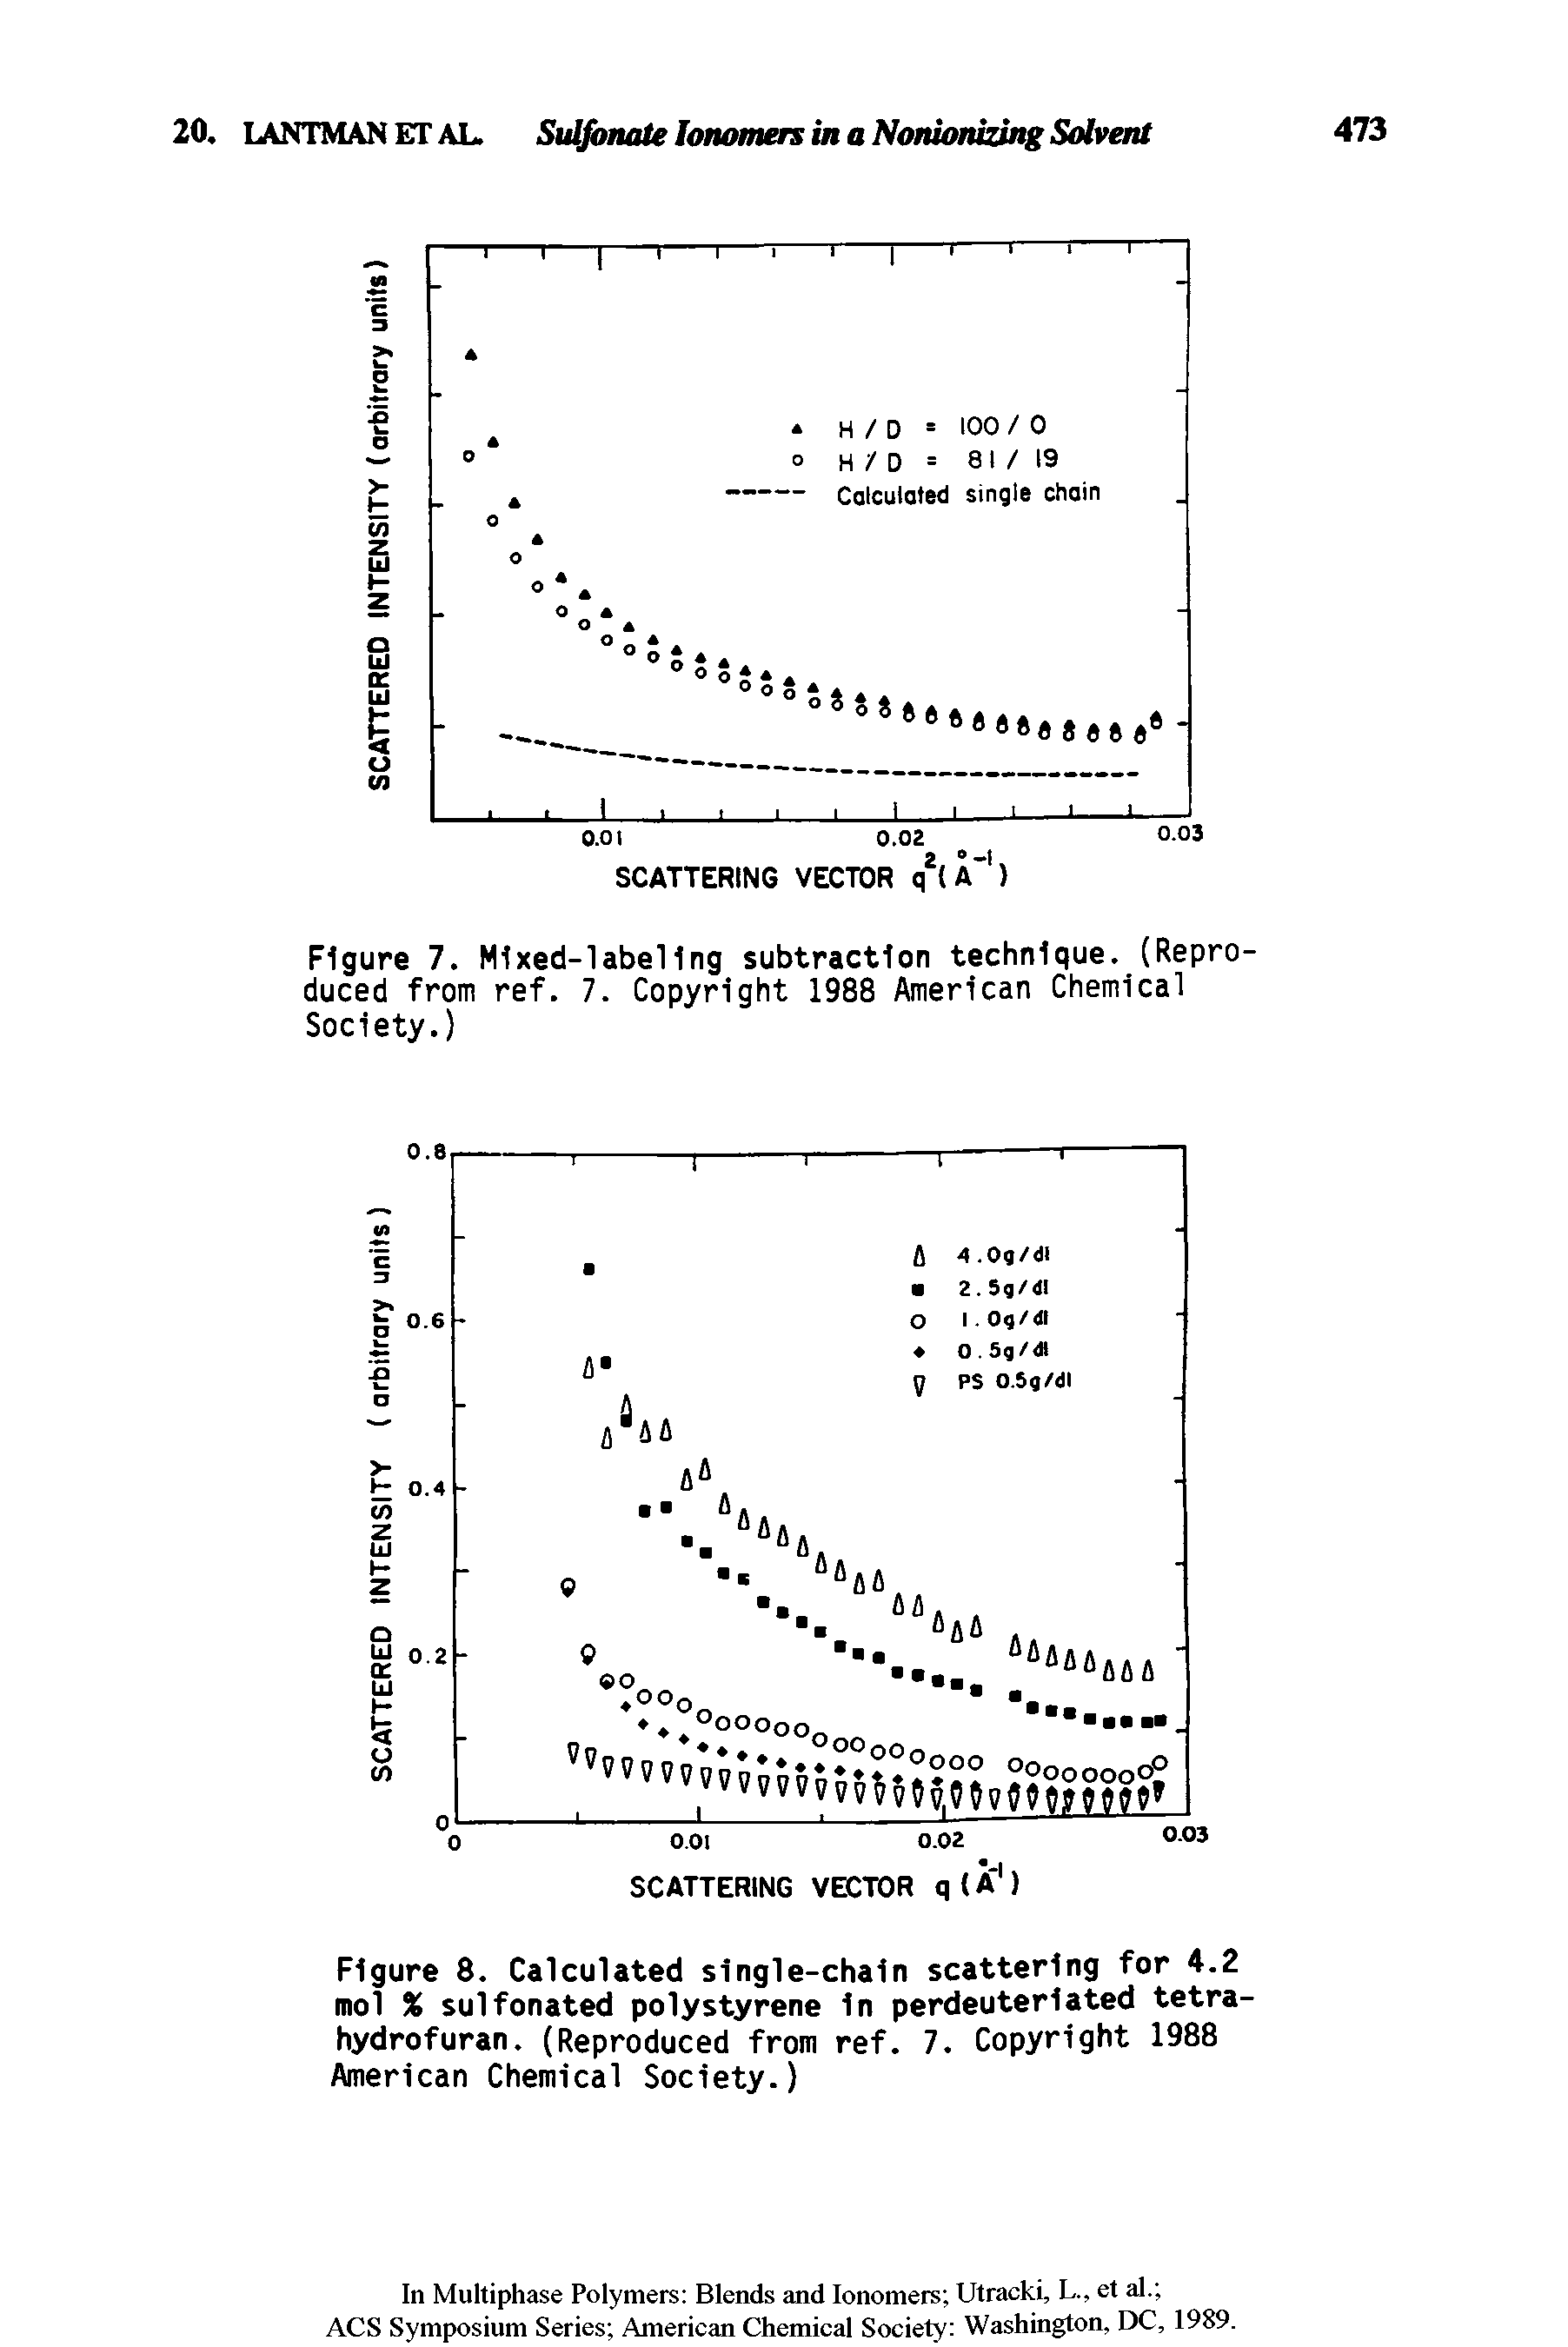 Figure 8. Calculated single-chain scattering for 4.2 mol % sulfonated polystyrene In perdeuteriated tetrahydrofuran. (Reproduced from ref. 7. Copyright 1988 American Chemical Society.)...